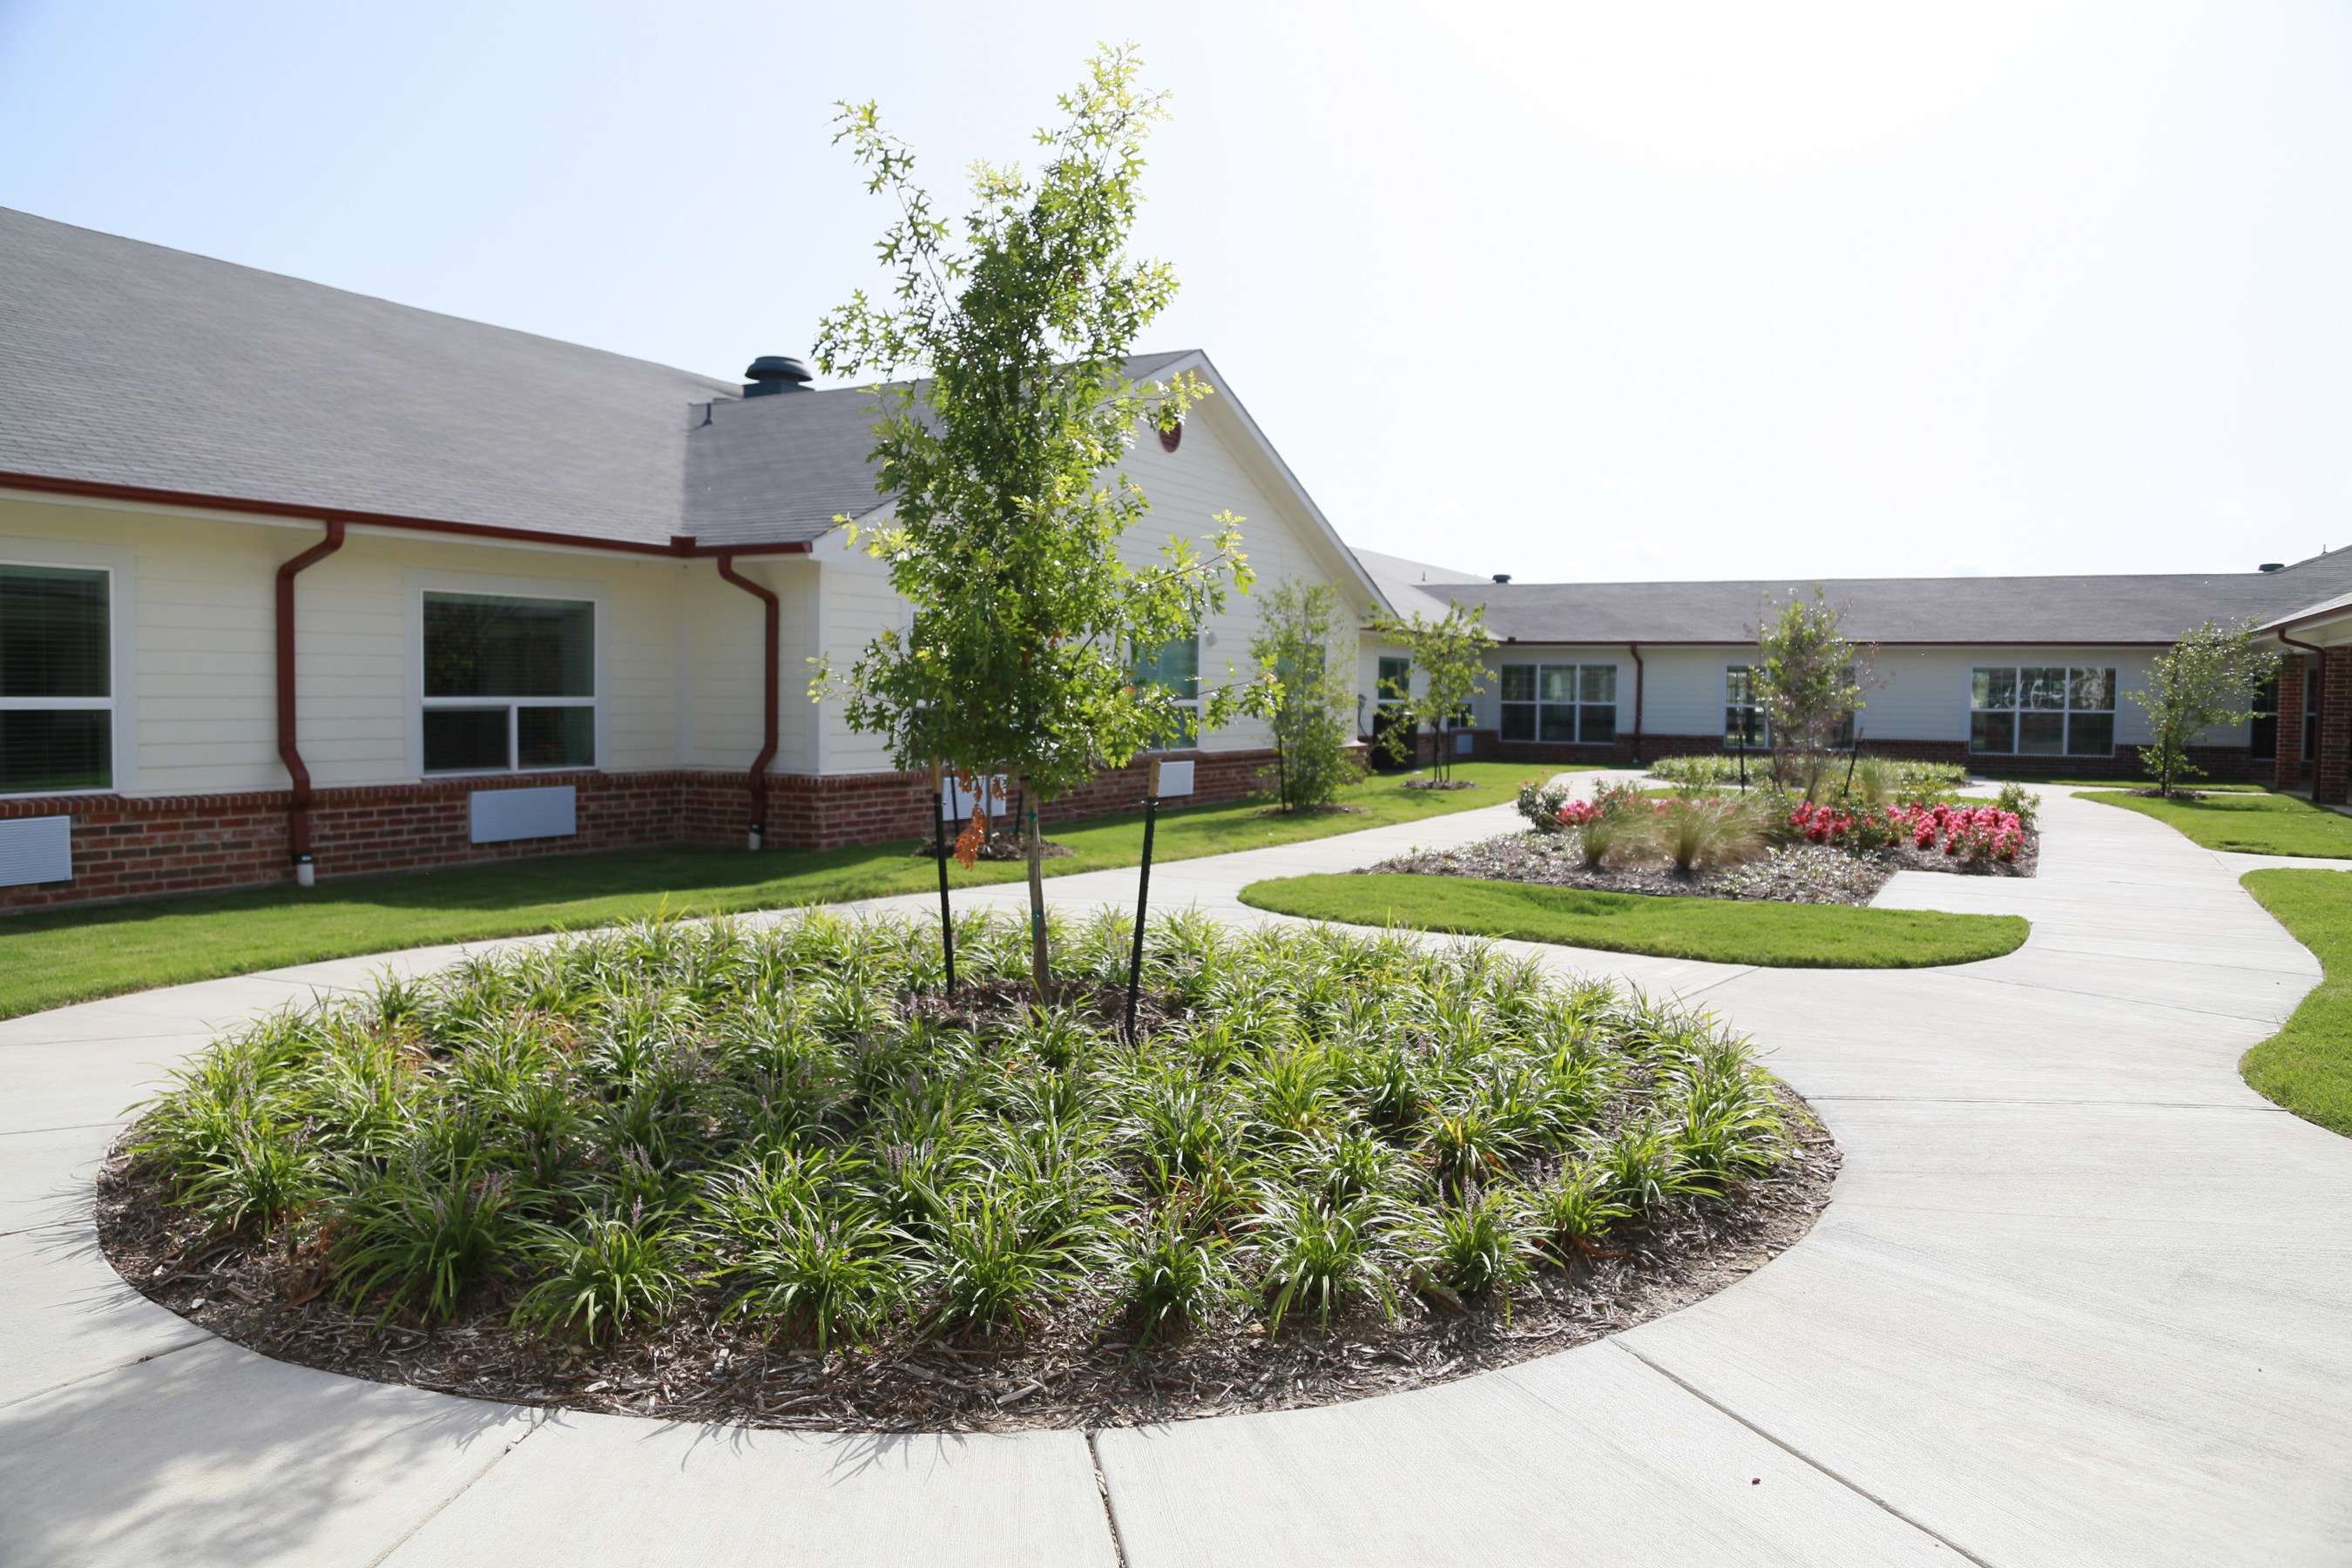 The final phase of Lakewest Assisted Living opened June 23, 2015, in Dallas, thanks in part to a $500,000 Affordable Housing Program (AHP) grant from Amegy Bank and the Federal Home Loan Bank of Dallas (FHLB Dallas).